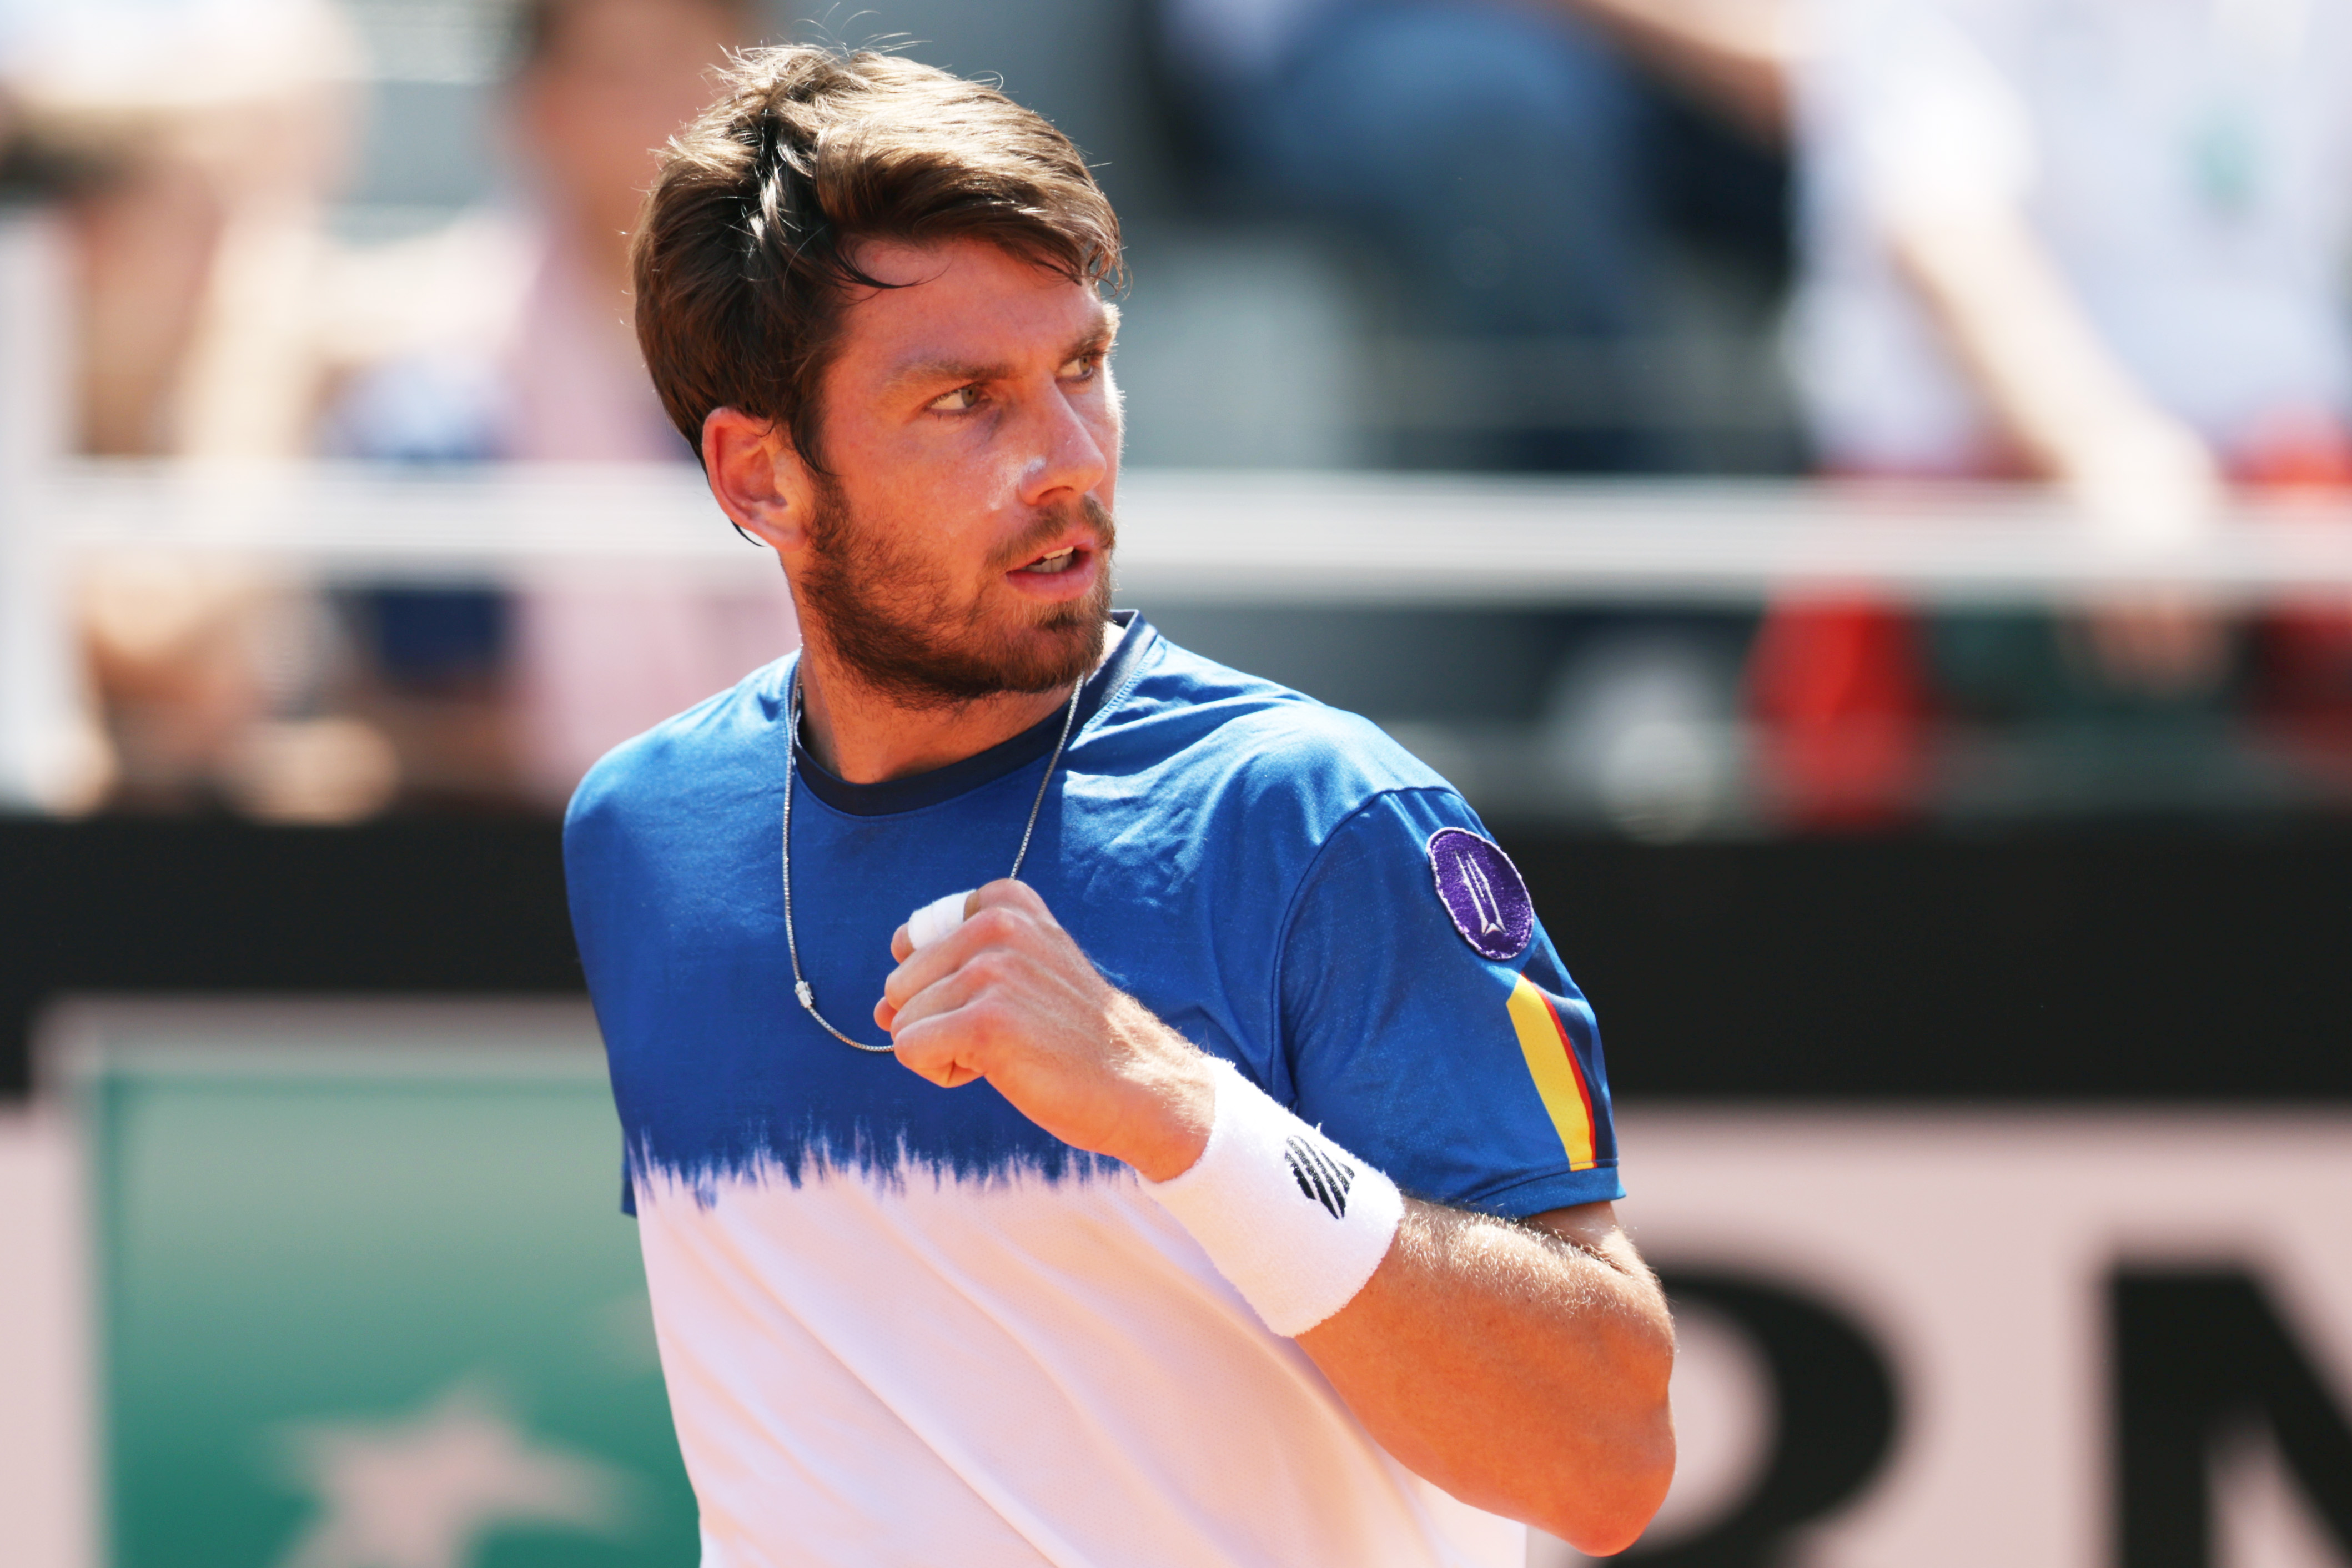 How to watch Cameron Norrie at ATP Lyon Open 2022